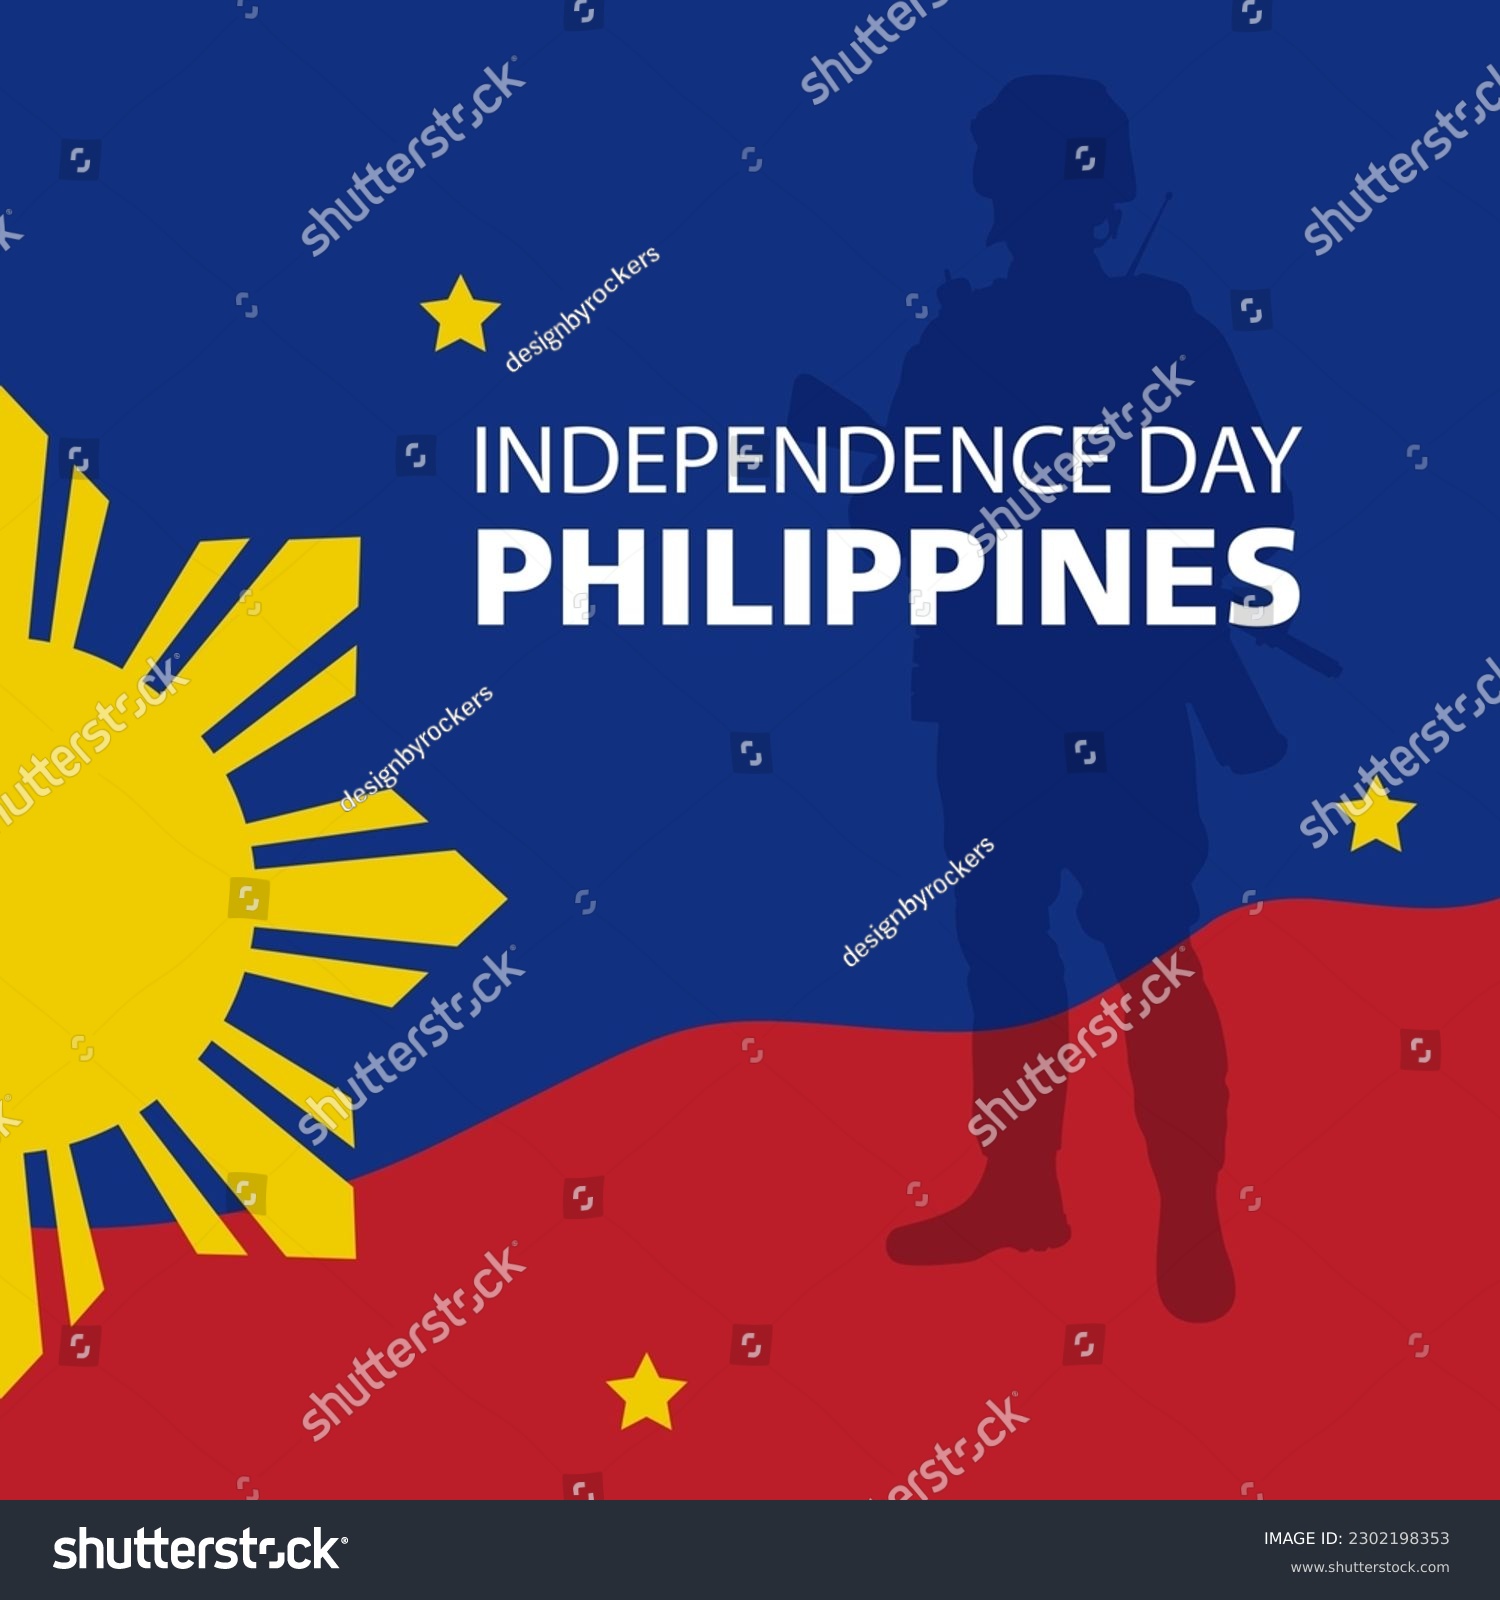 SVG of Philippine Independence Day, also known as Araw ng Kalayaan in the Filipino language, is celebrated every year on June 12th to commemorate the country's independence from Spain in 1898. svg